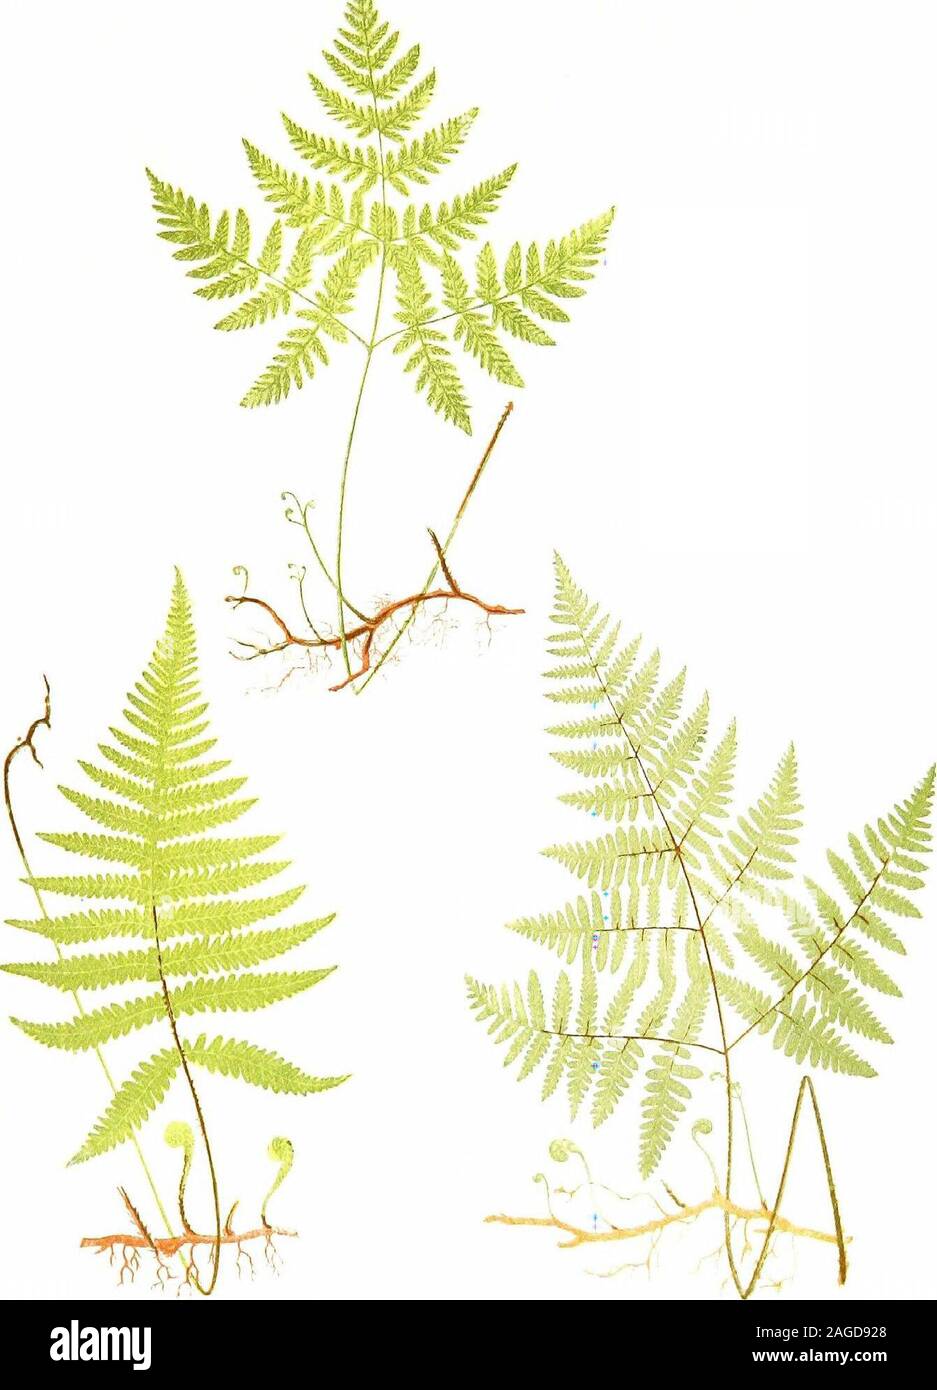 . British ferns and their varieties. vulgare, the Common Polypody, P.dryopteris, the Oak Fern, P. phegopteris, the Beech Fern, andP- calcareum {Robertianum), the Limestone Polypody. The namePolypodium signifies many-footed, the rootstocks travelling onor near the surface of the soil, and, as in the well-known HaresfootFern (Davallia), the growing tips resemble more or less hairy paws.In point of fact, however, many species, the Davallias themselvesto wit, do the same thing, but belong to quite different genera, theactual generic distinction of the Polypodium family being a fruc-tification, con Stock Photo